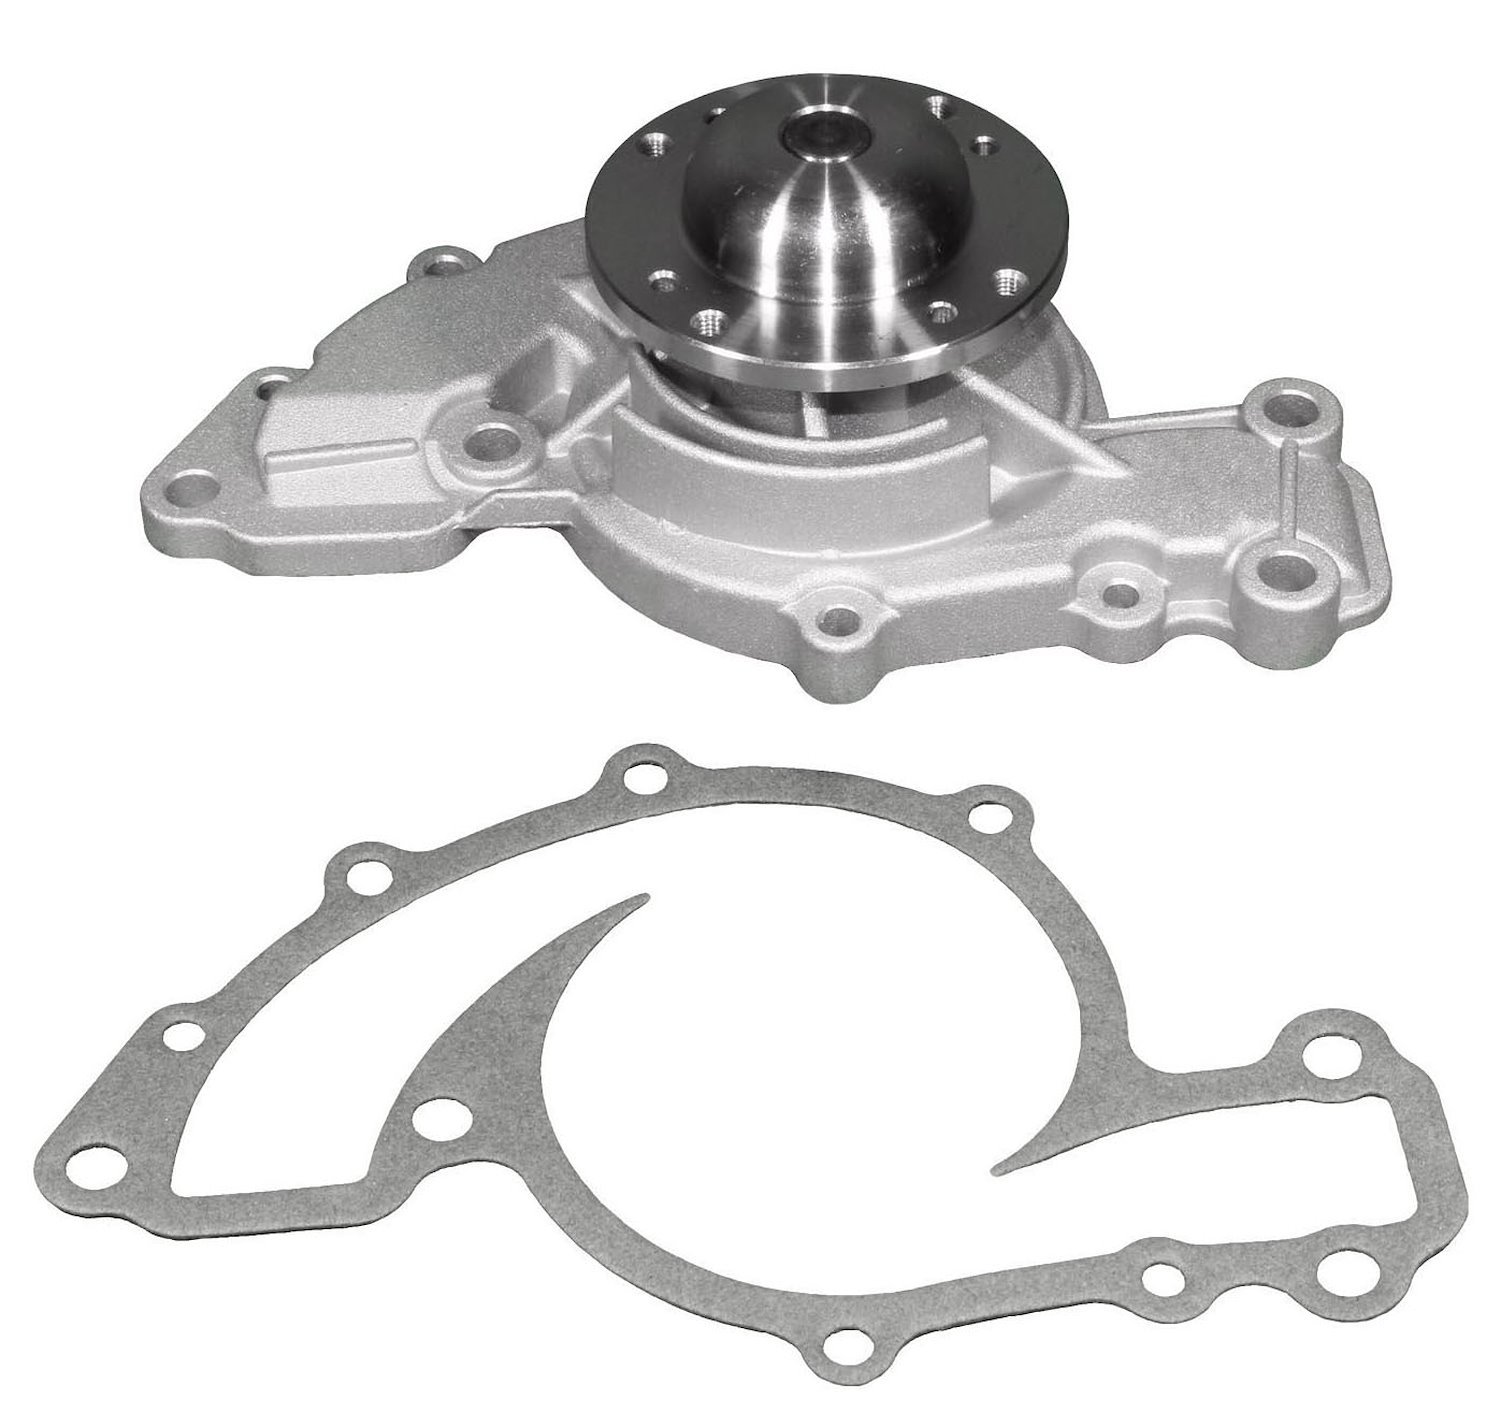 Premium Water Pump Fits Select GM 3.8L OHV Engines